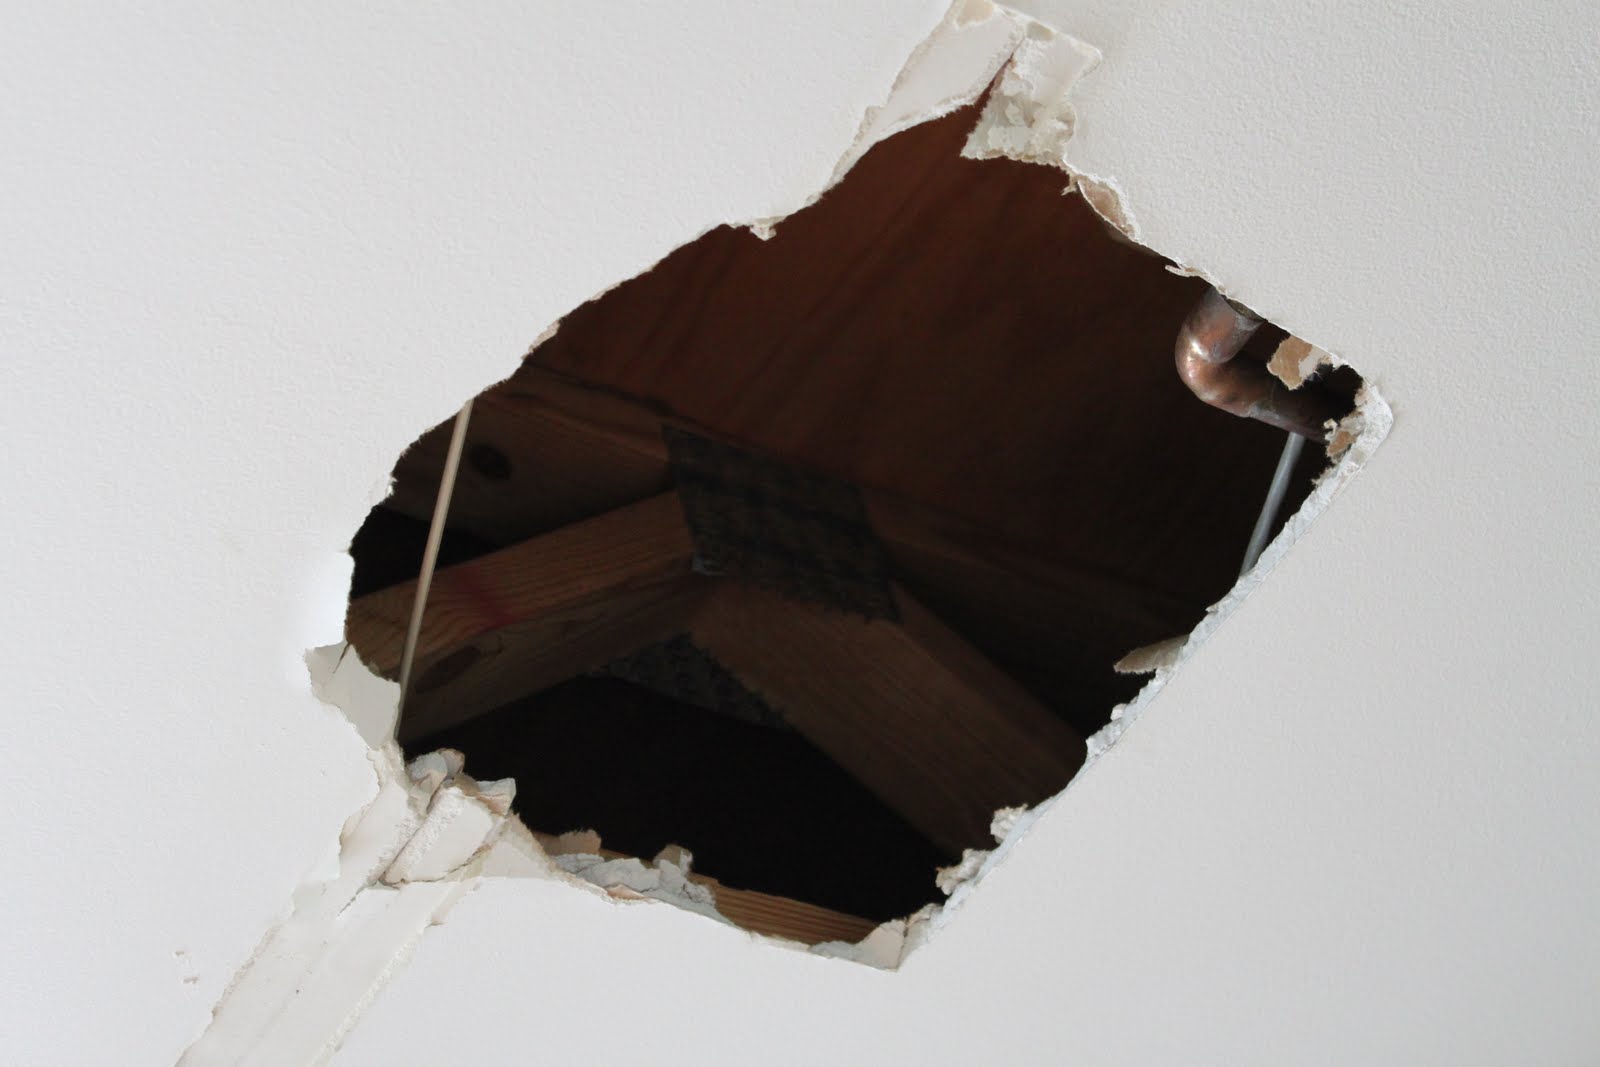 hole+in+the+ceiling+002.JPG